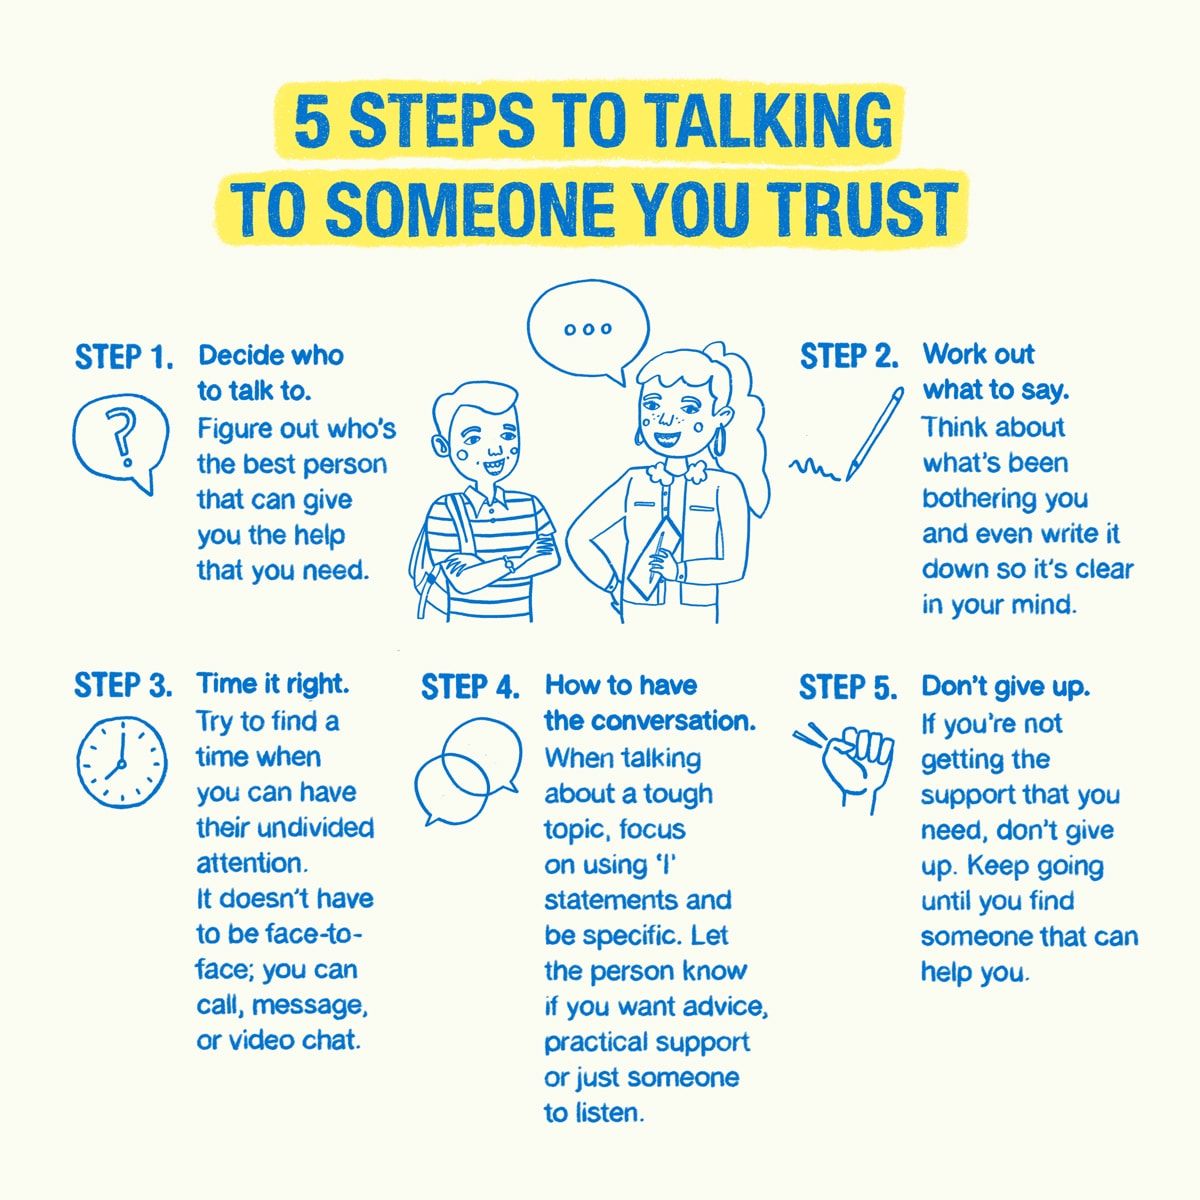 Talk to Someone You Trust